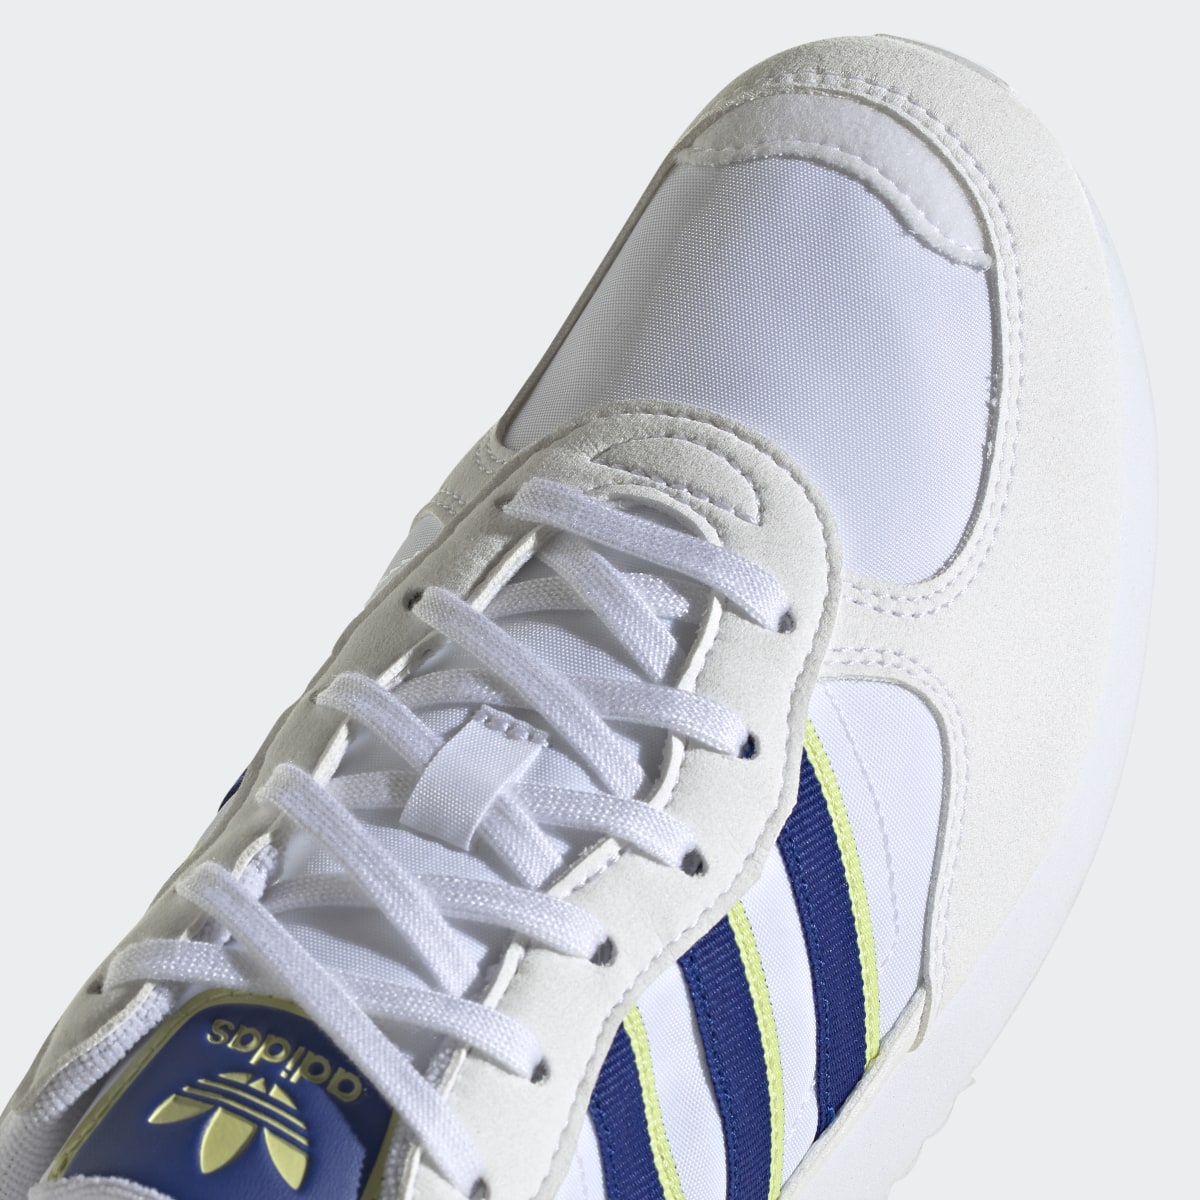 Adidas Special 21 Shoes. 10